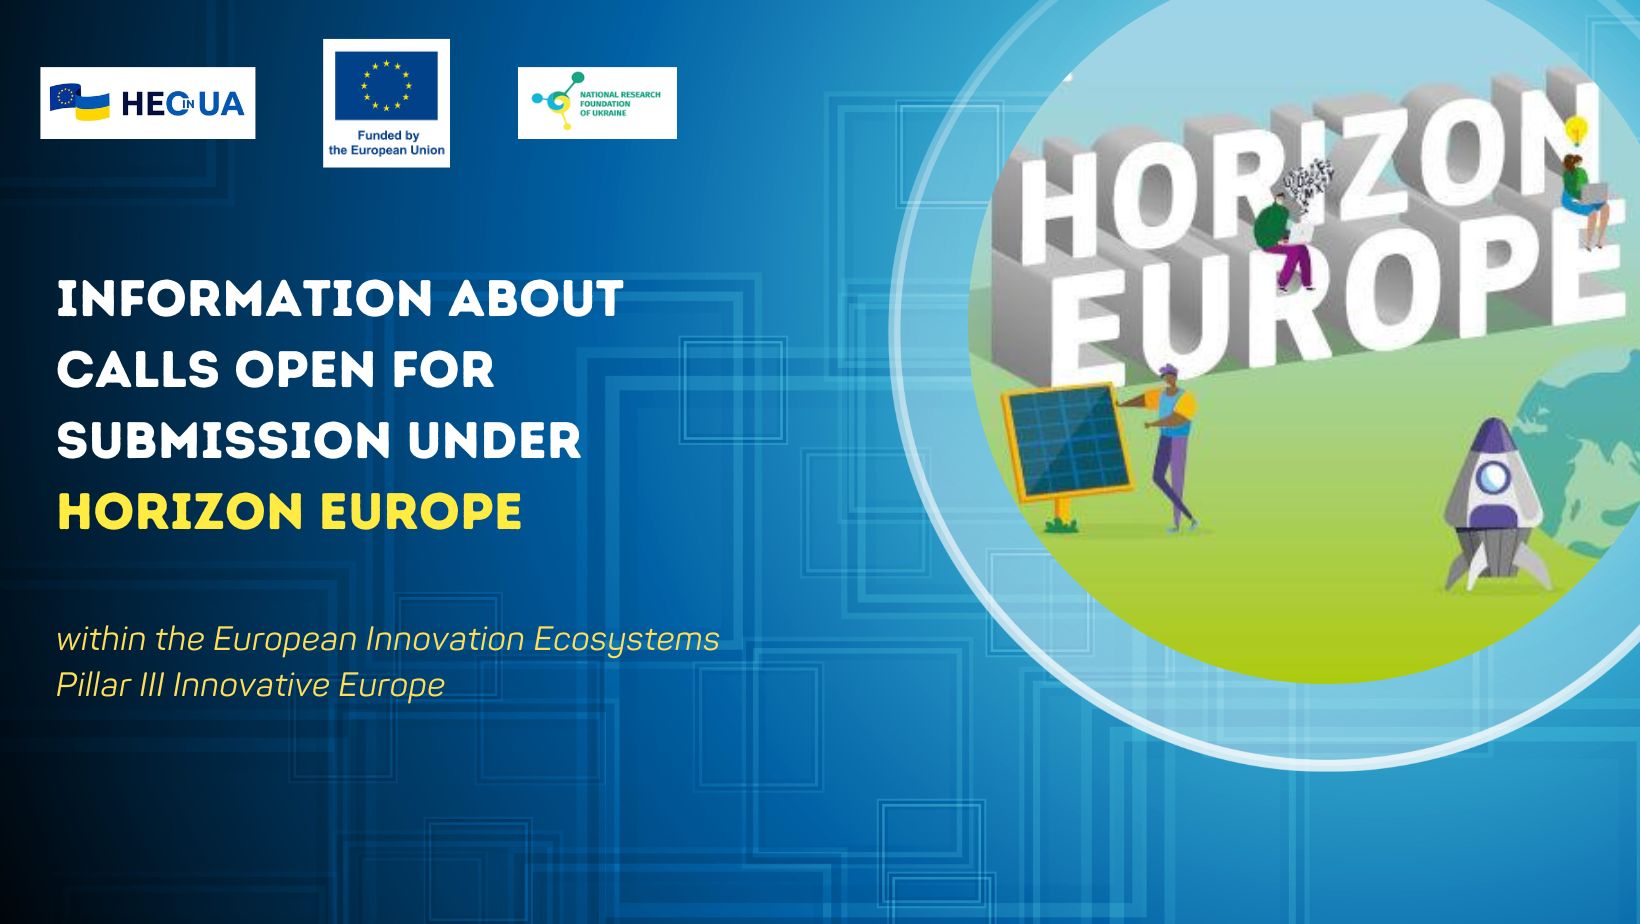 Information about calls open for submission under the European Innovation Ecosystems